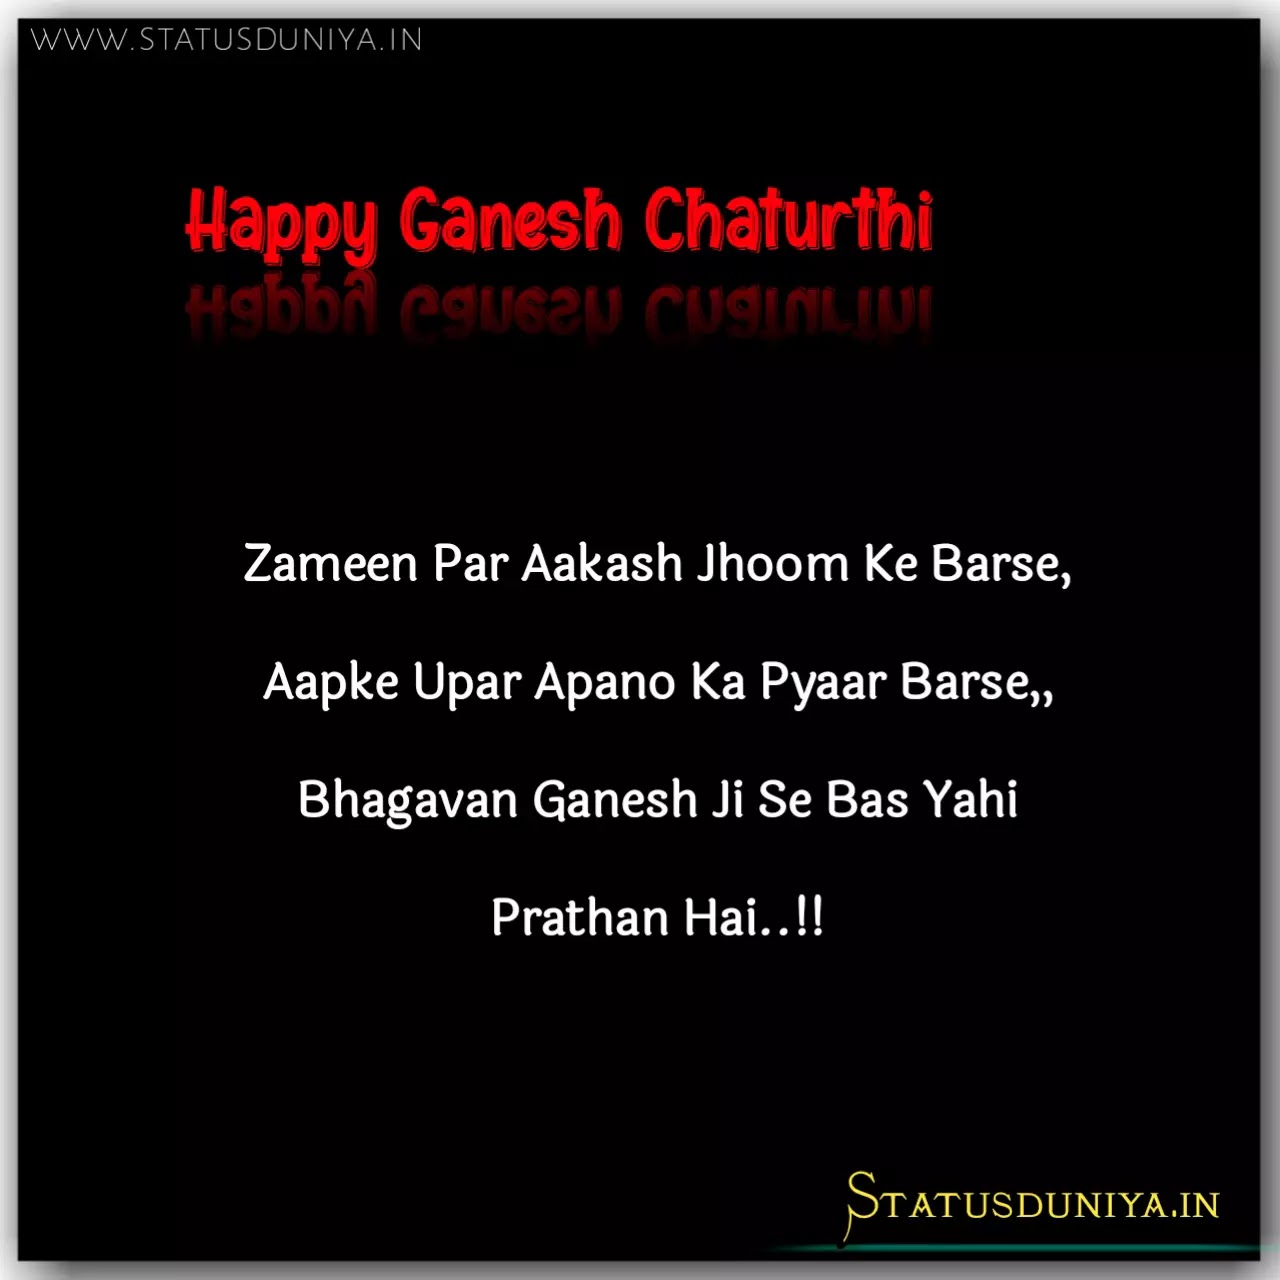 Ganesh Chaturthi Wishes In Hindi 2022 With Images
ganesh chaturthi 2022 wishes in hindi
ganesh chaturthi 2022 quotes in hindi
ganesh chaturthi wishes in hindi
ganesh chaturthi greetings in hindi